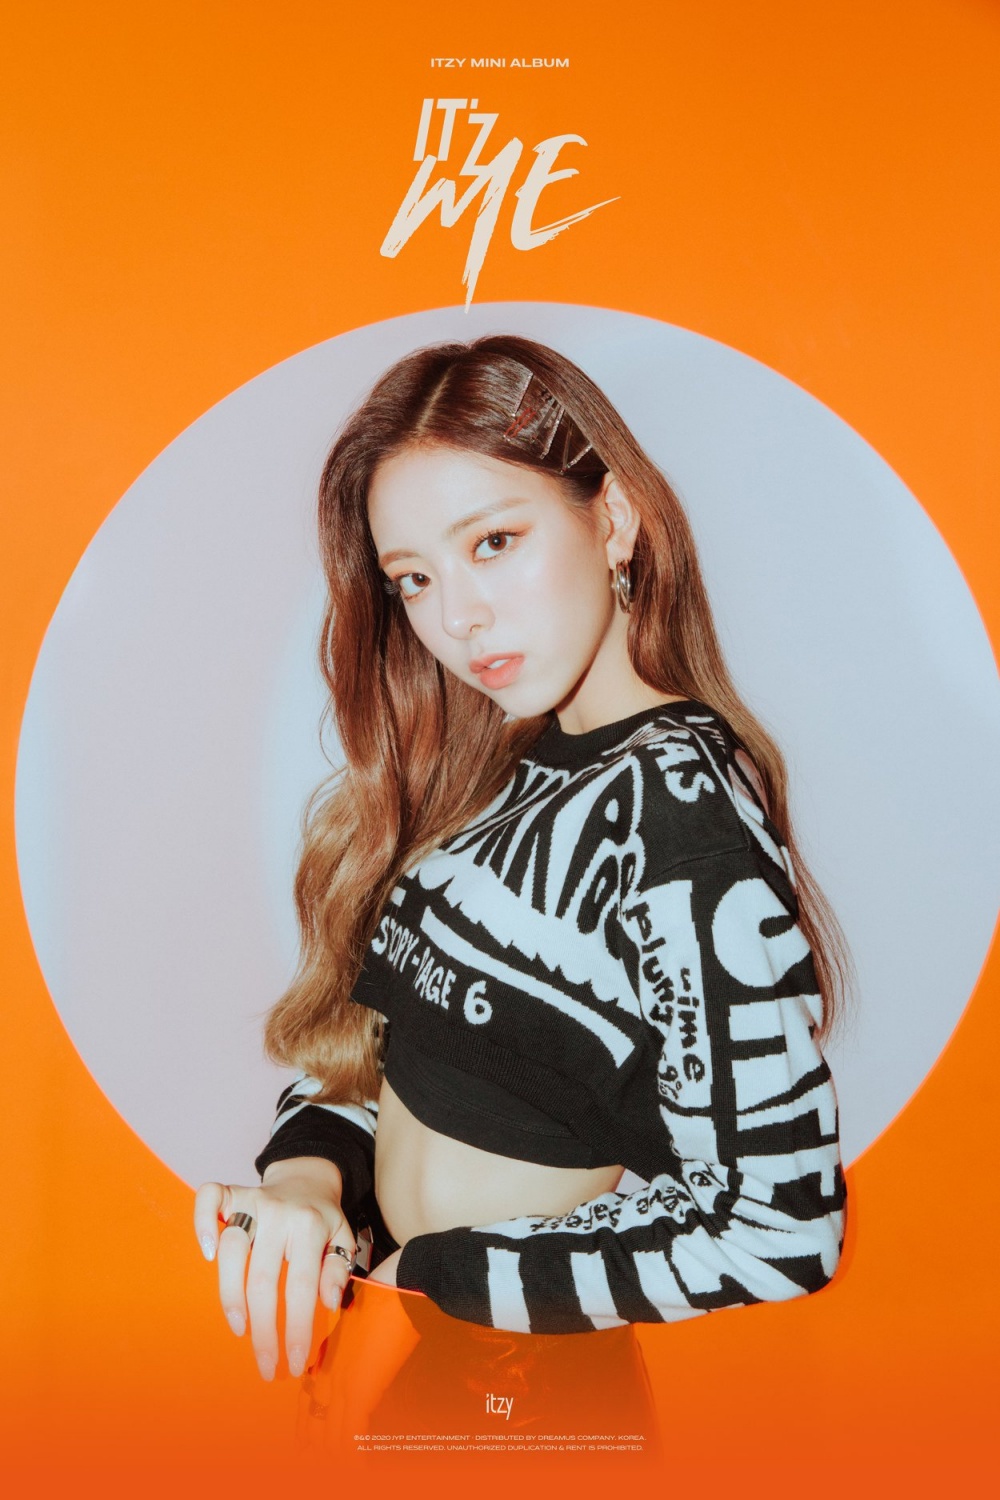 ITZY Member Yuna Showed Off Her Charm On Latest SNS Photos